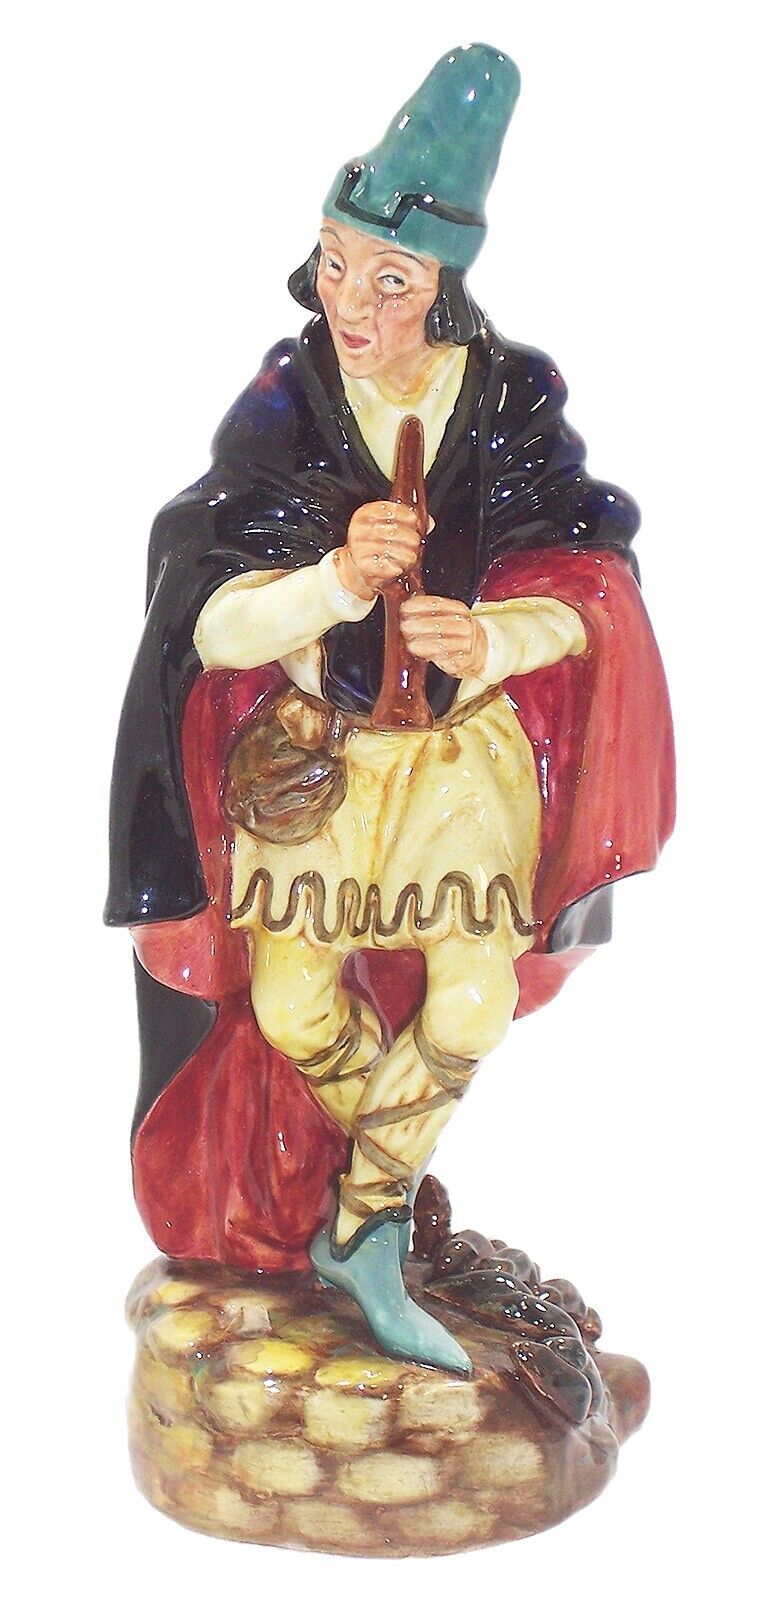 Royal Doulton Porcelain Figurine, “The Pied Piper”, HN2102, 1952, 9” High